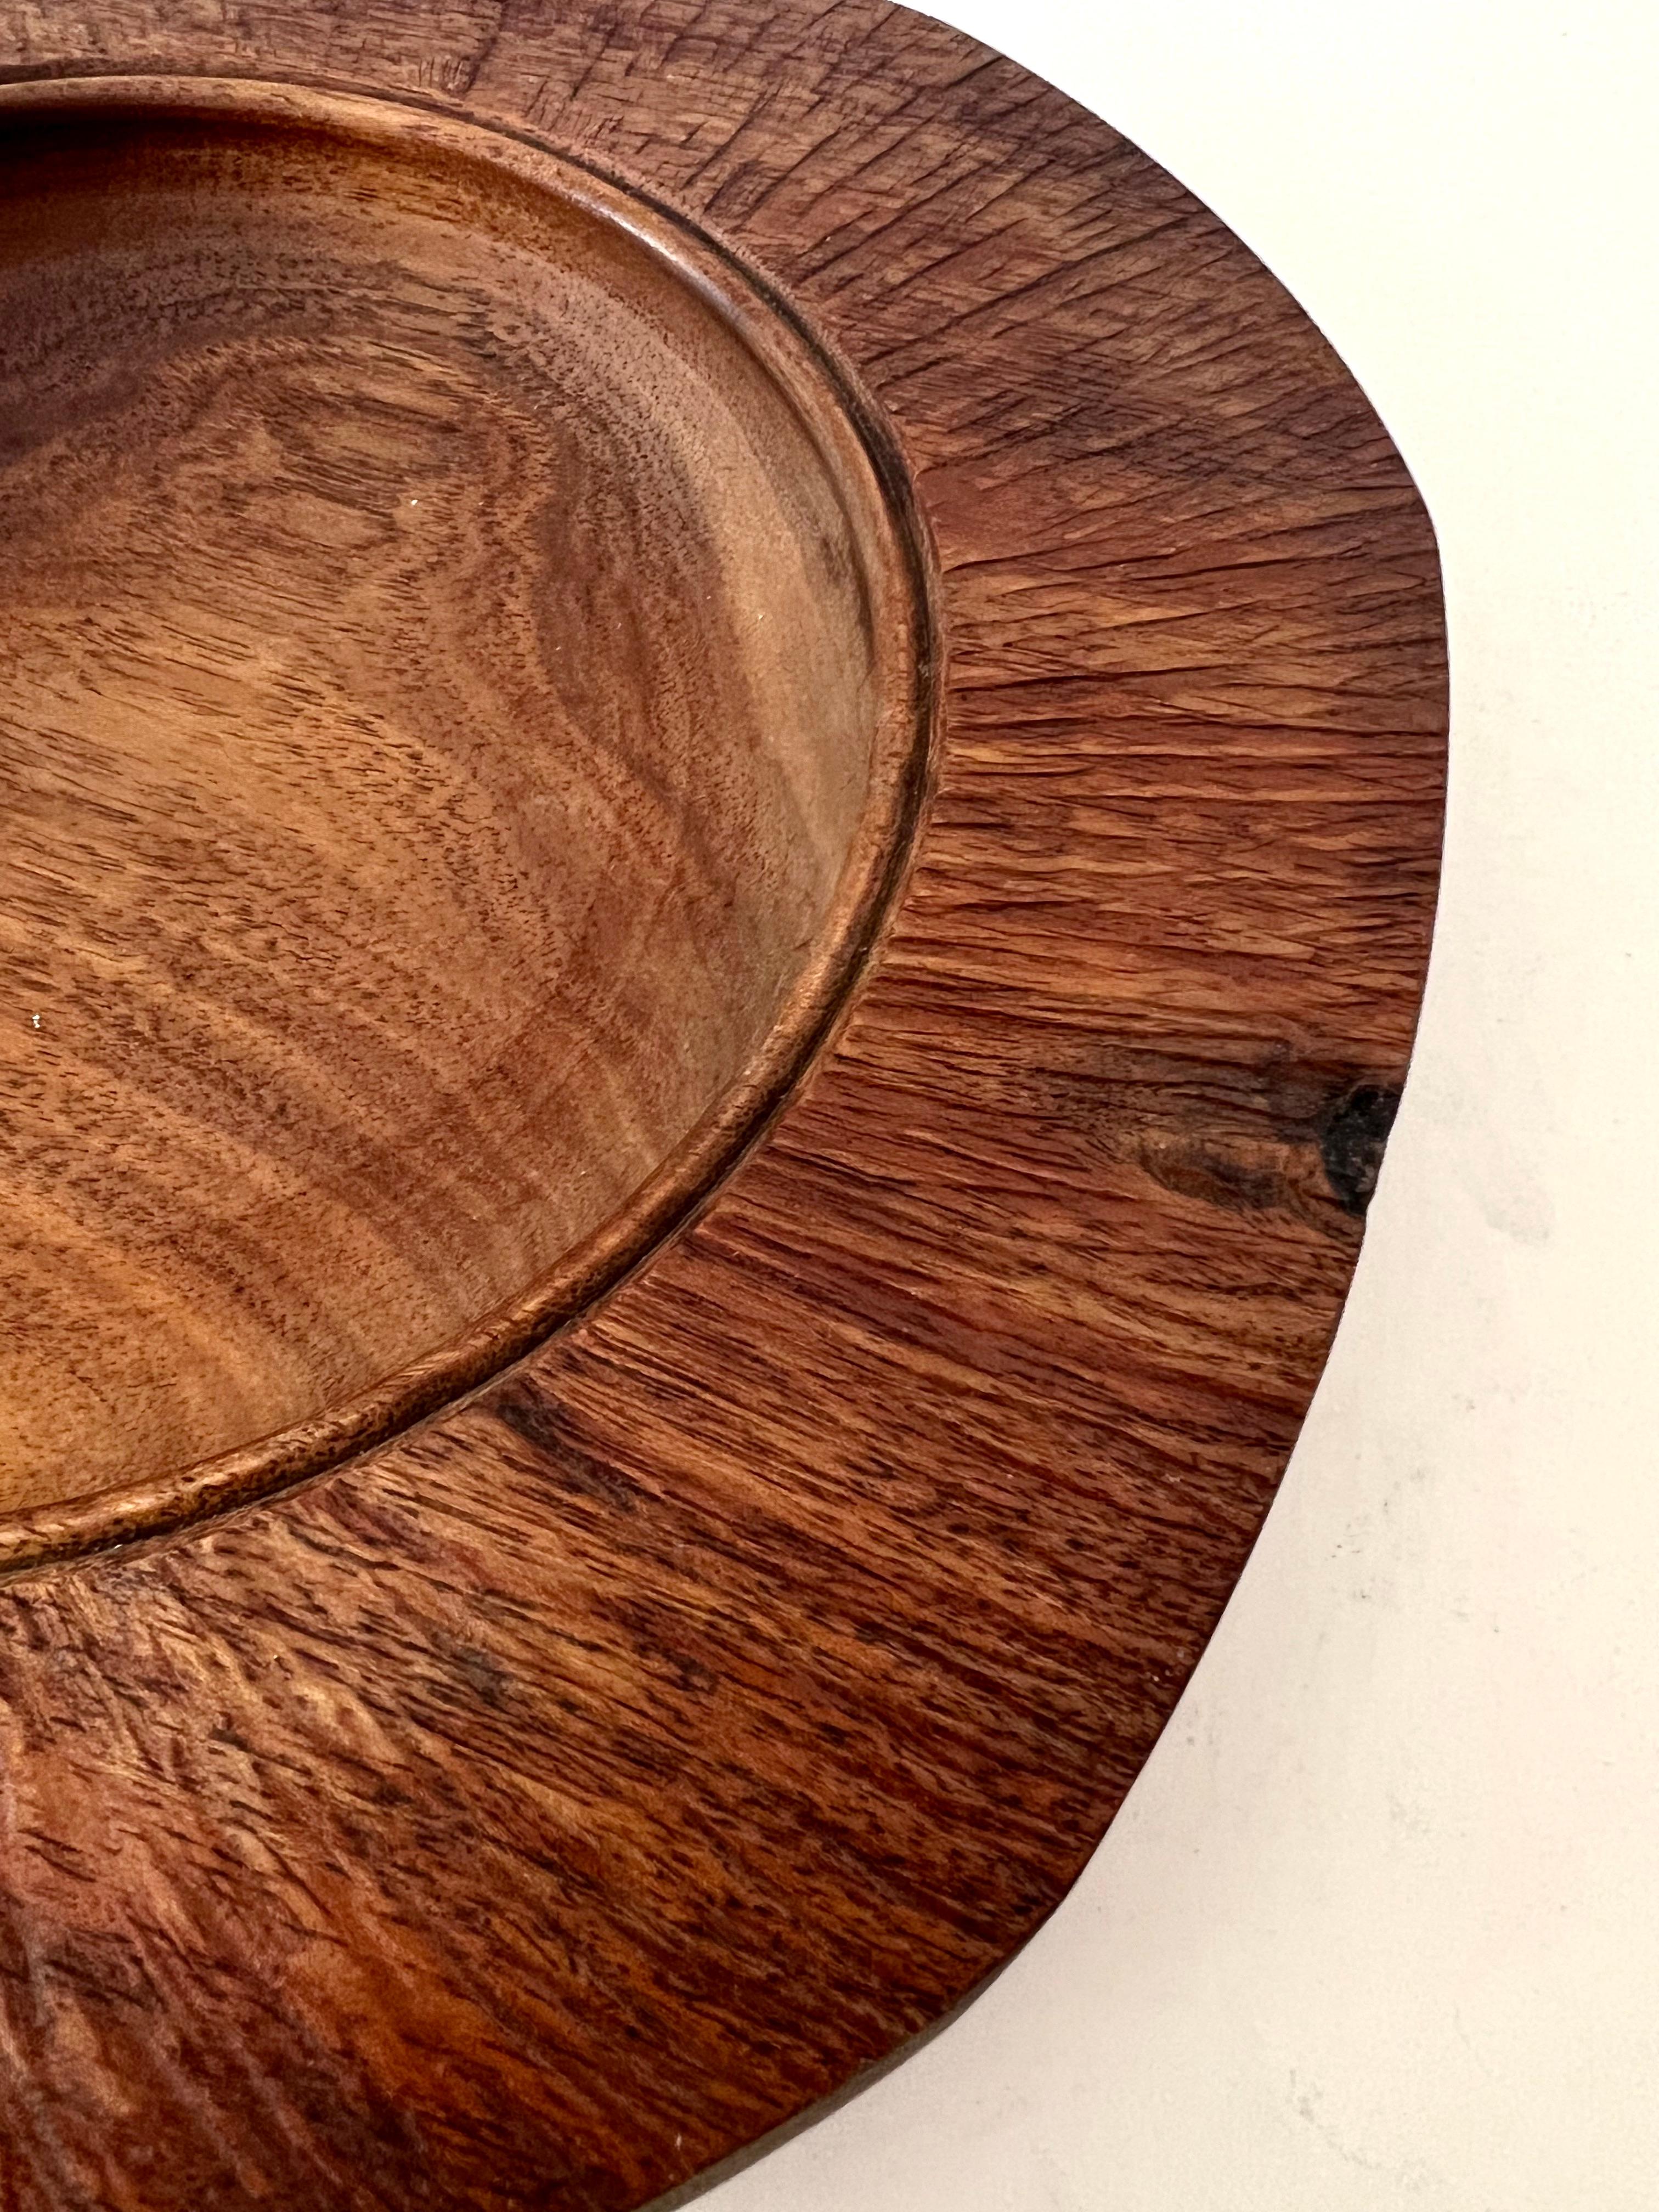 Organic Modern Signed Handmade New Zealand Blackwood Bowl with Rough Hewn Edges For Sale